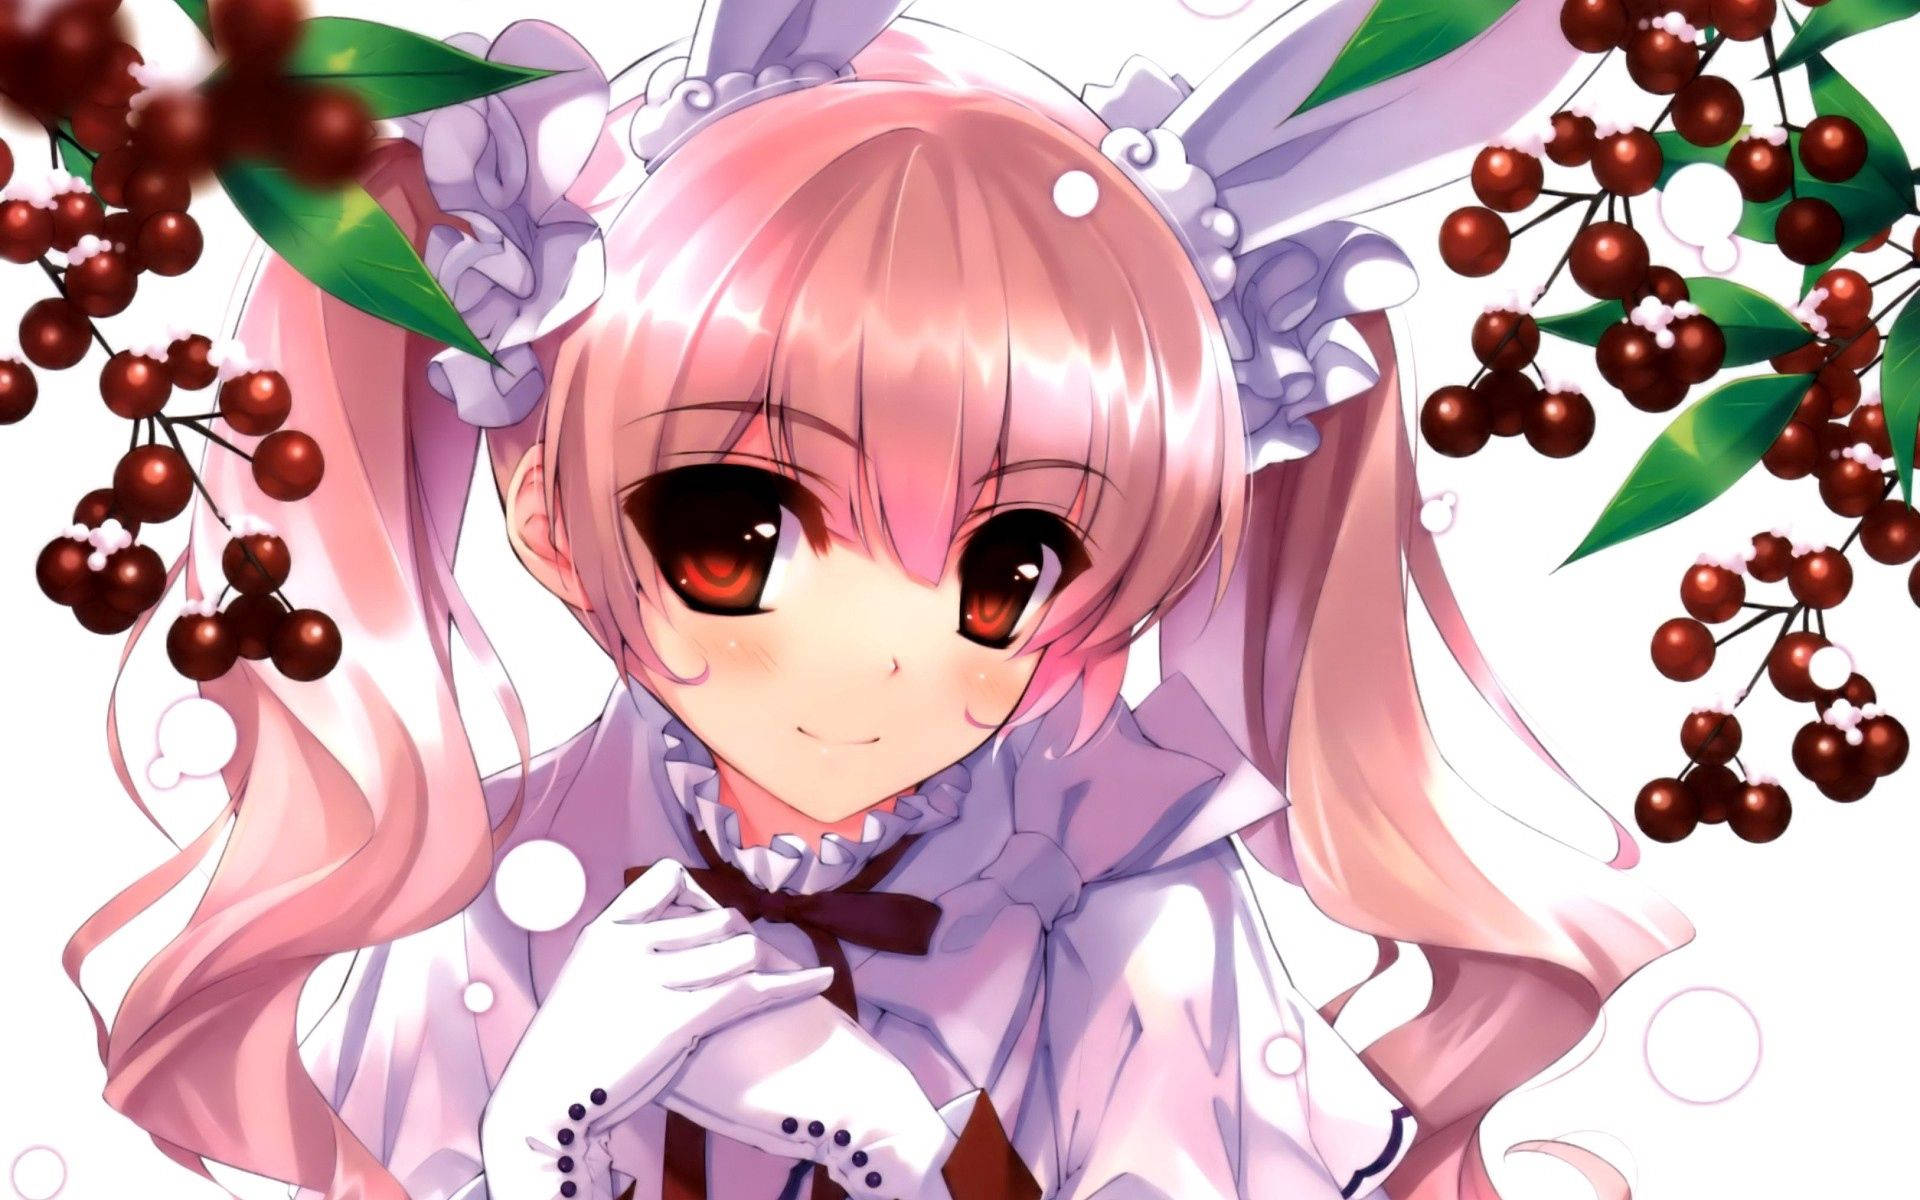 Cute Anime Girl Surrounded By Cherries Background